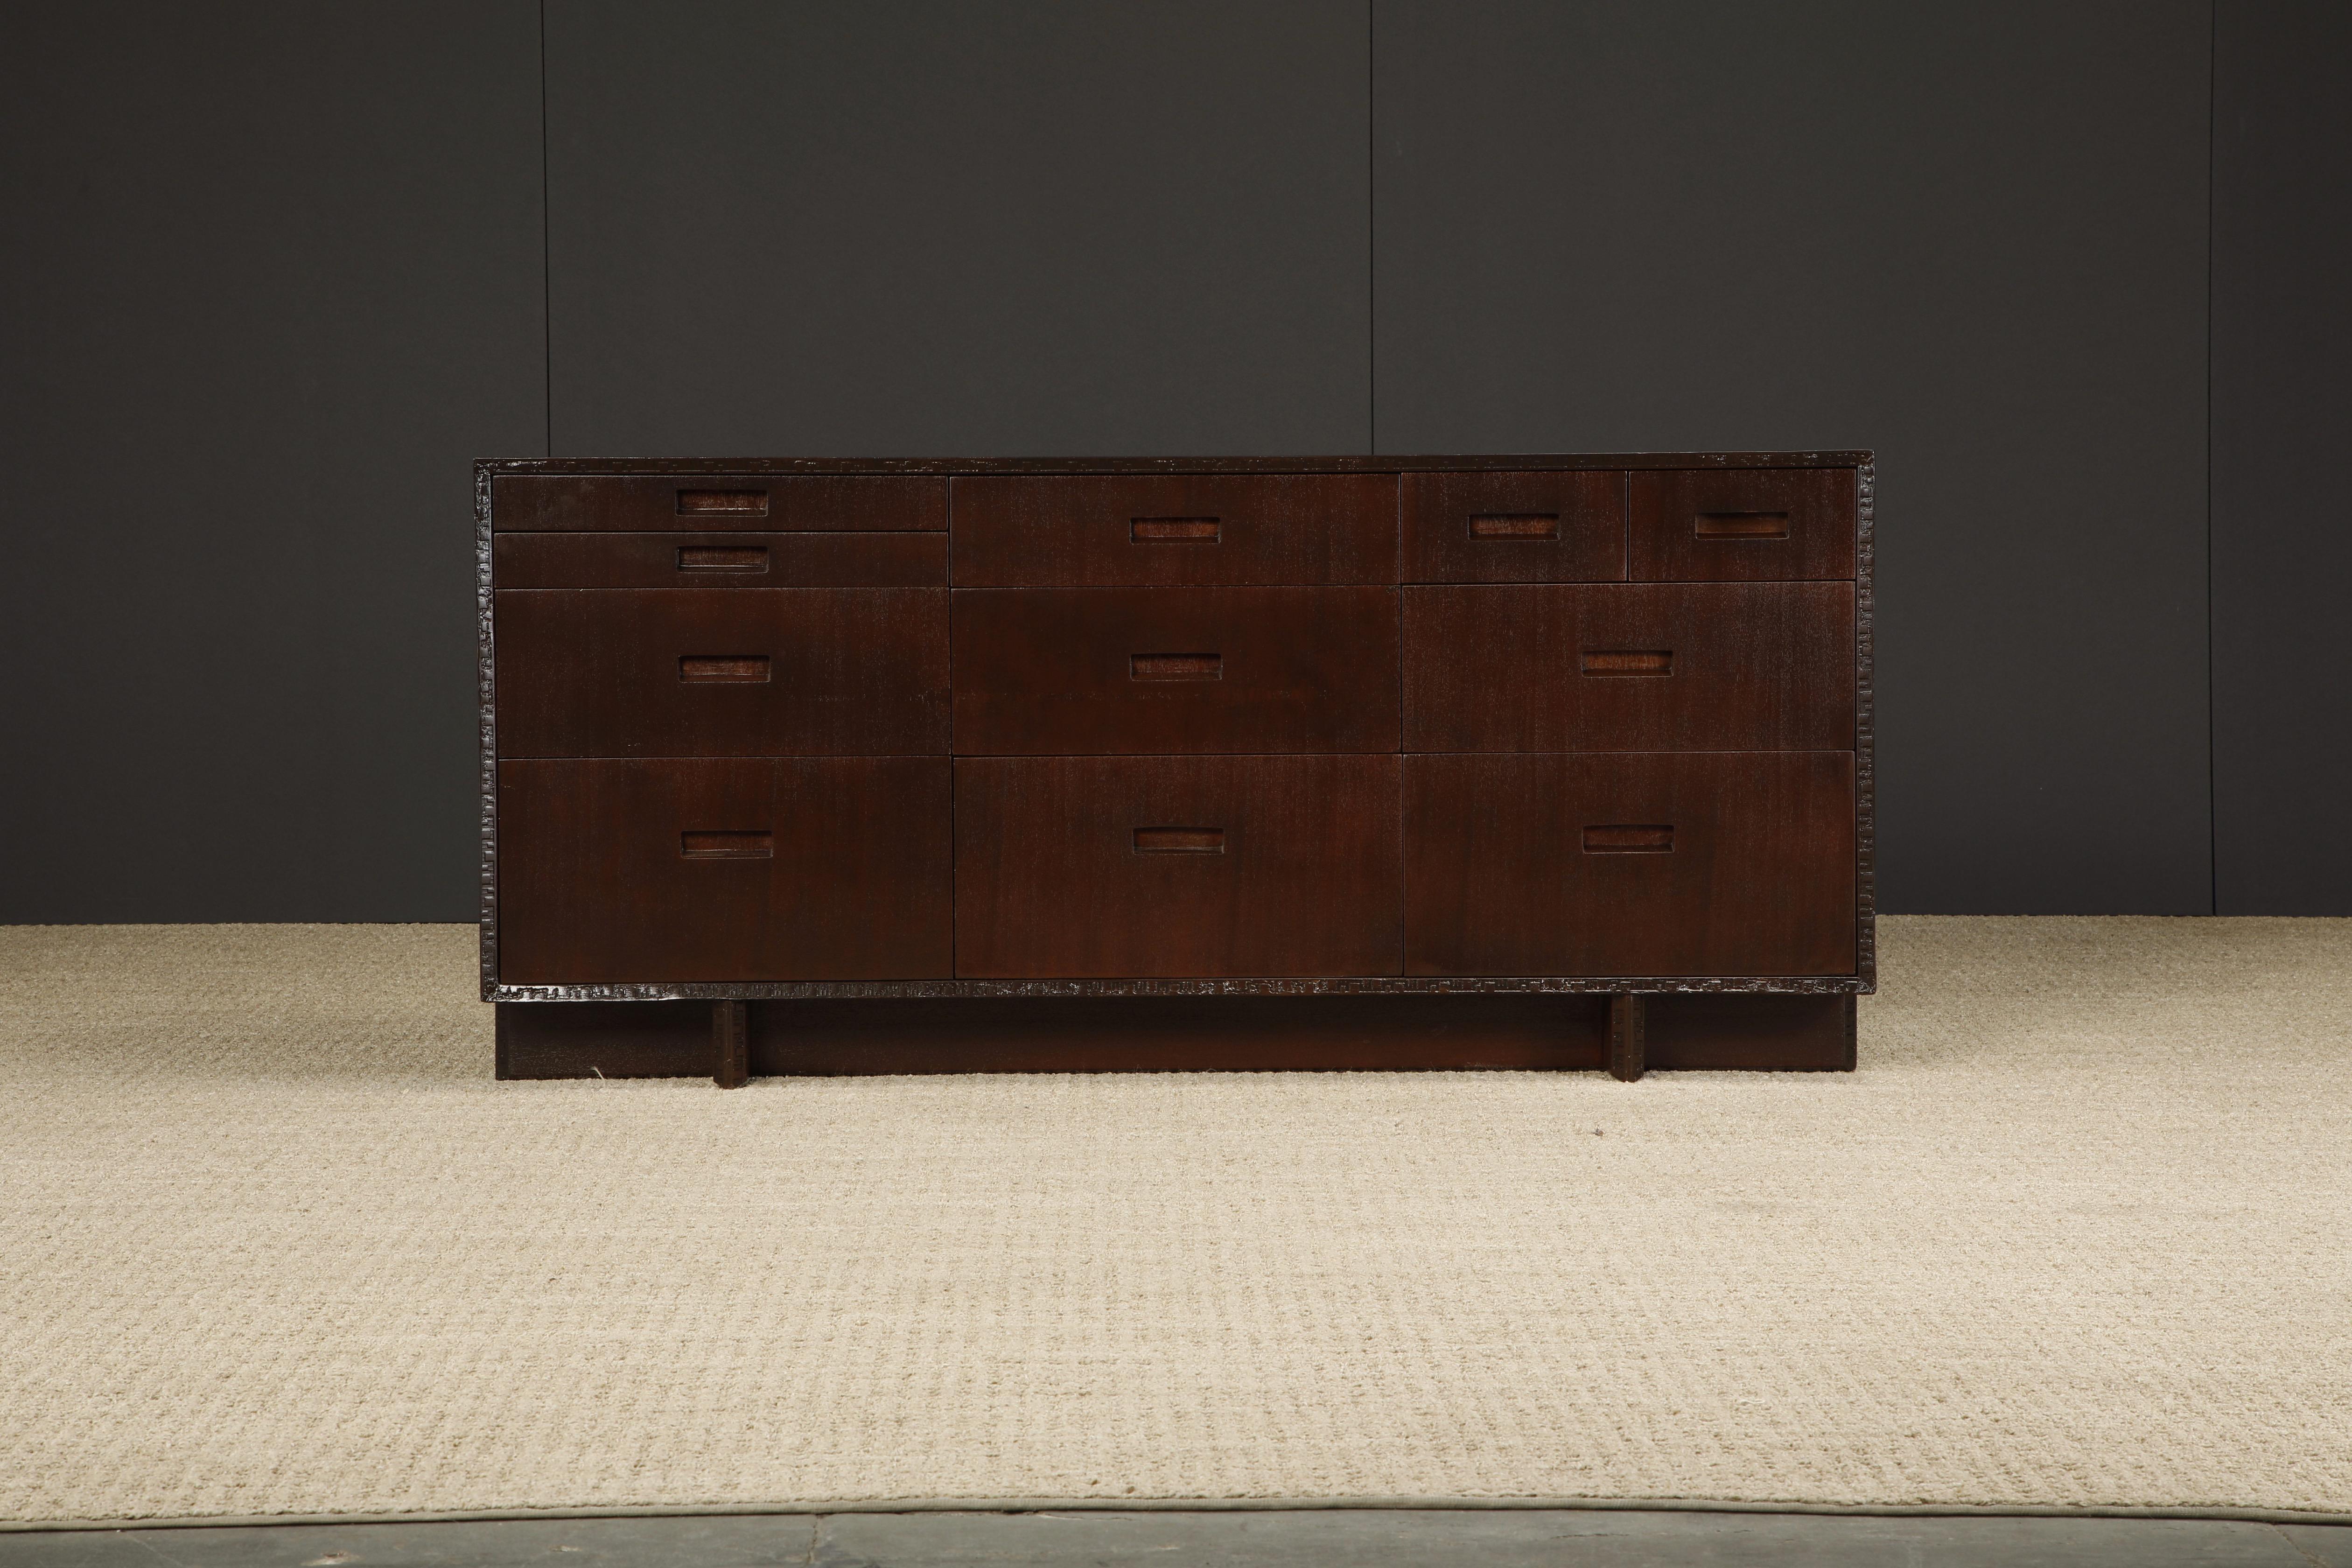 This refinished Honduran Mahogany 'Taliesin' dresser / sideboard was designed by Frank Lloyd Wright for Heritage-Henredon in 1955 and produced only for two years, therefore is now a highly sought-after and rare collectors item. This example is